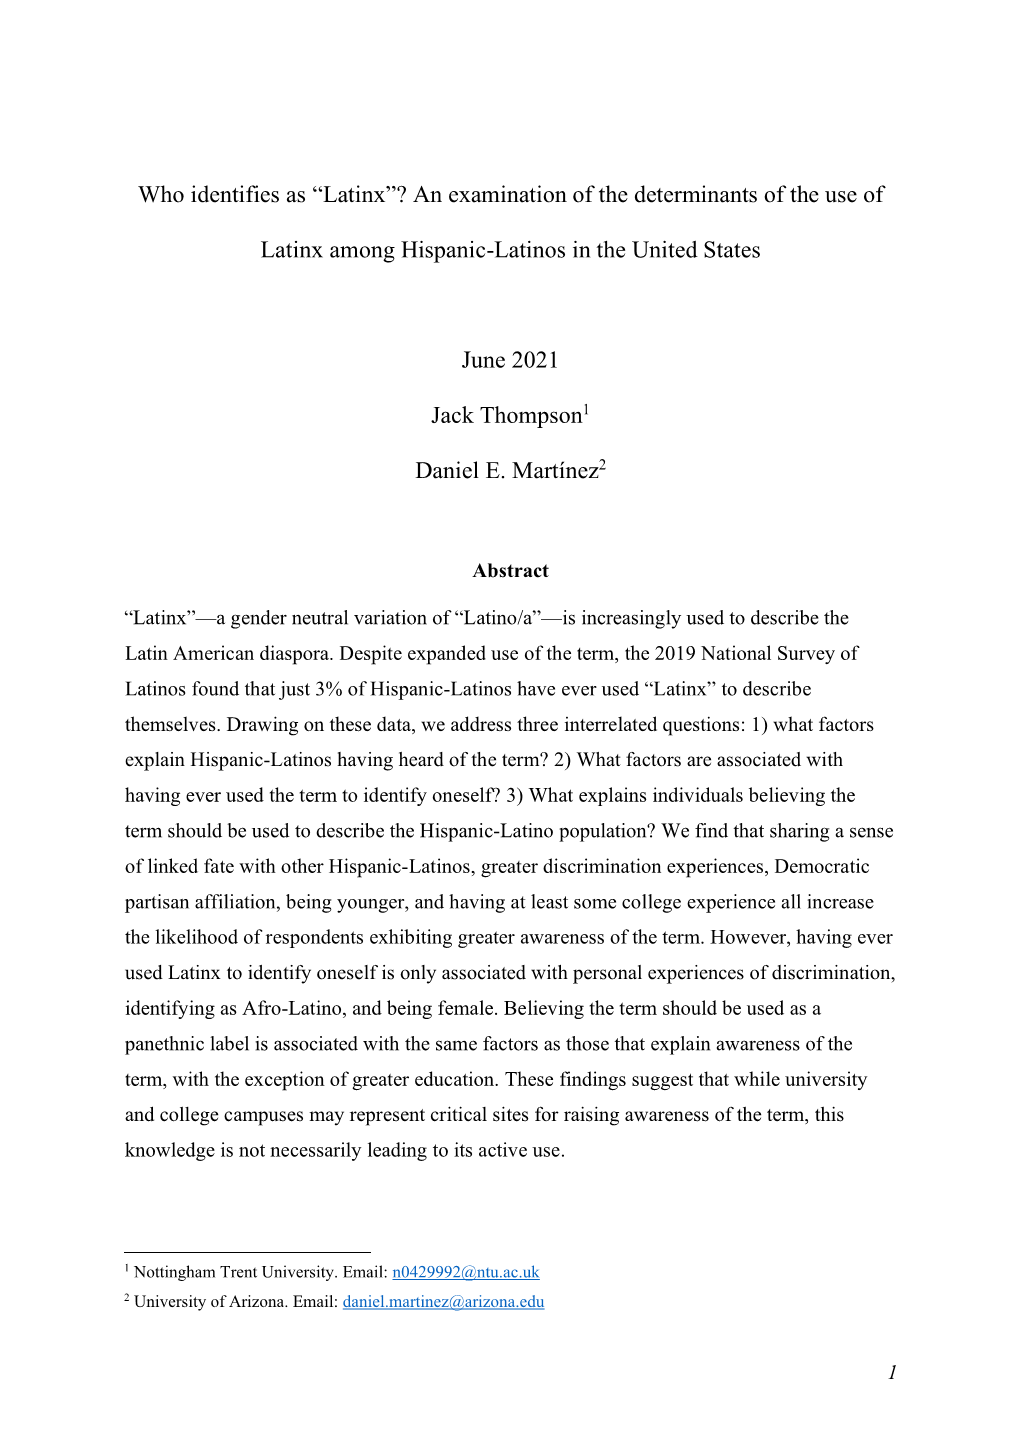 An Examination of the Determinants of the Use of Latinx Among Hispanic